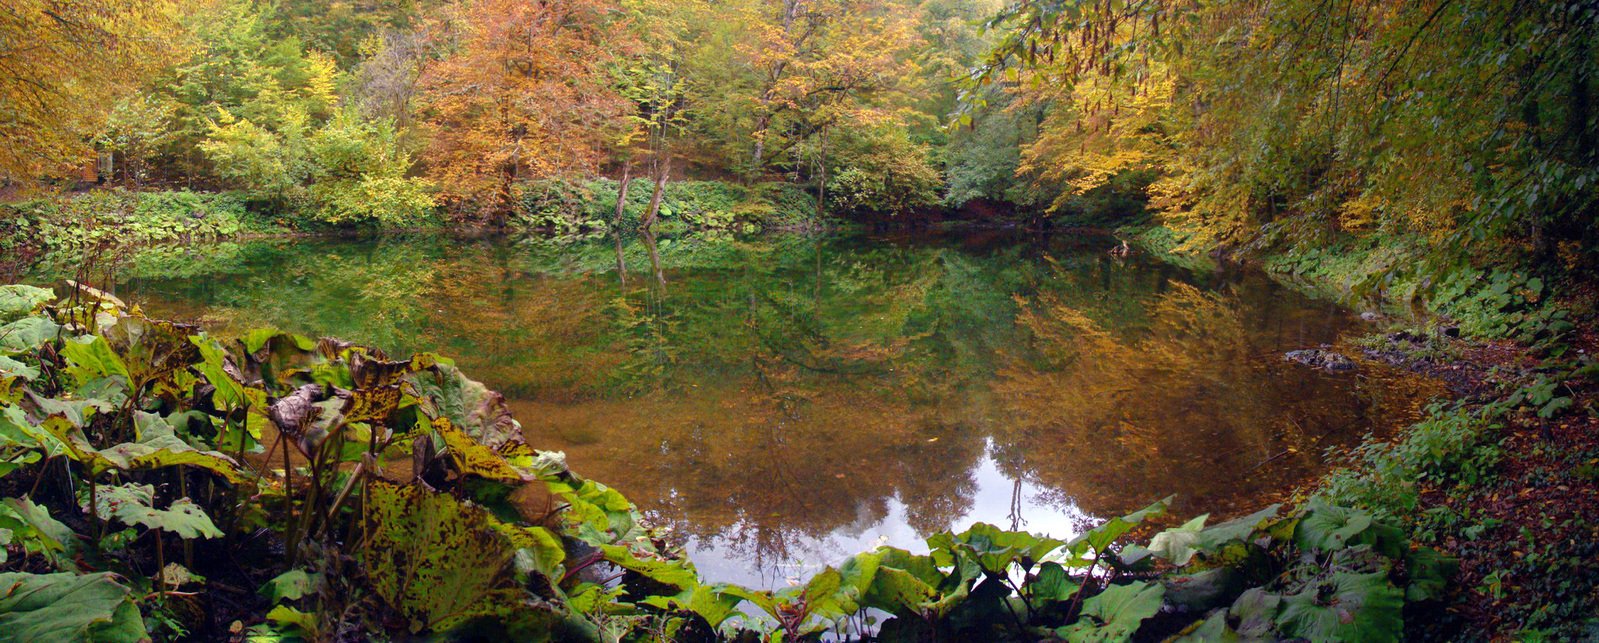 autumn leaves reflect on a still water pond